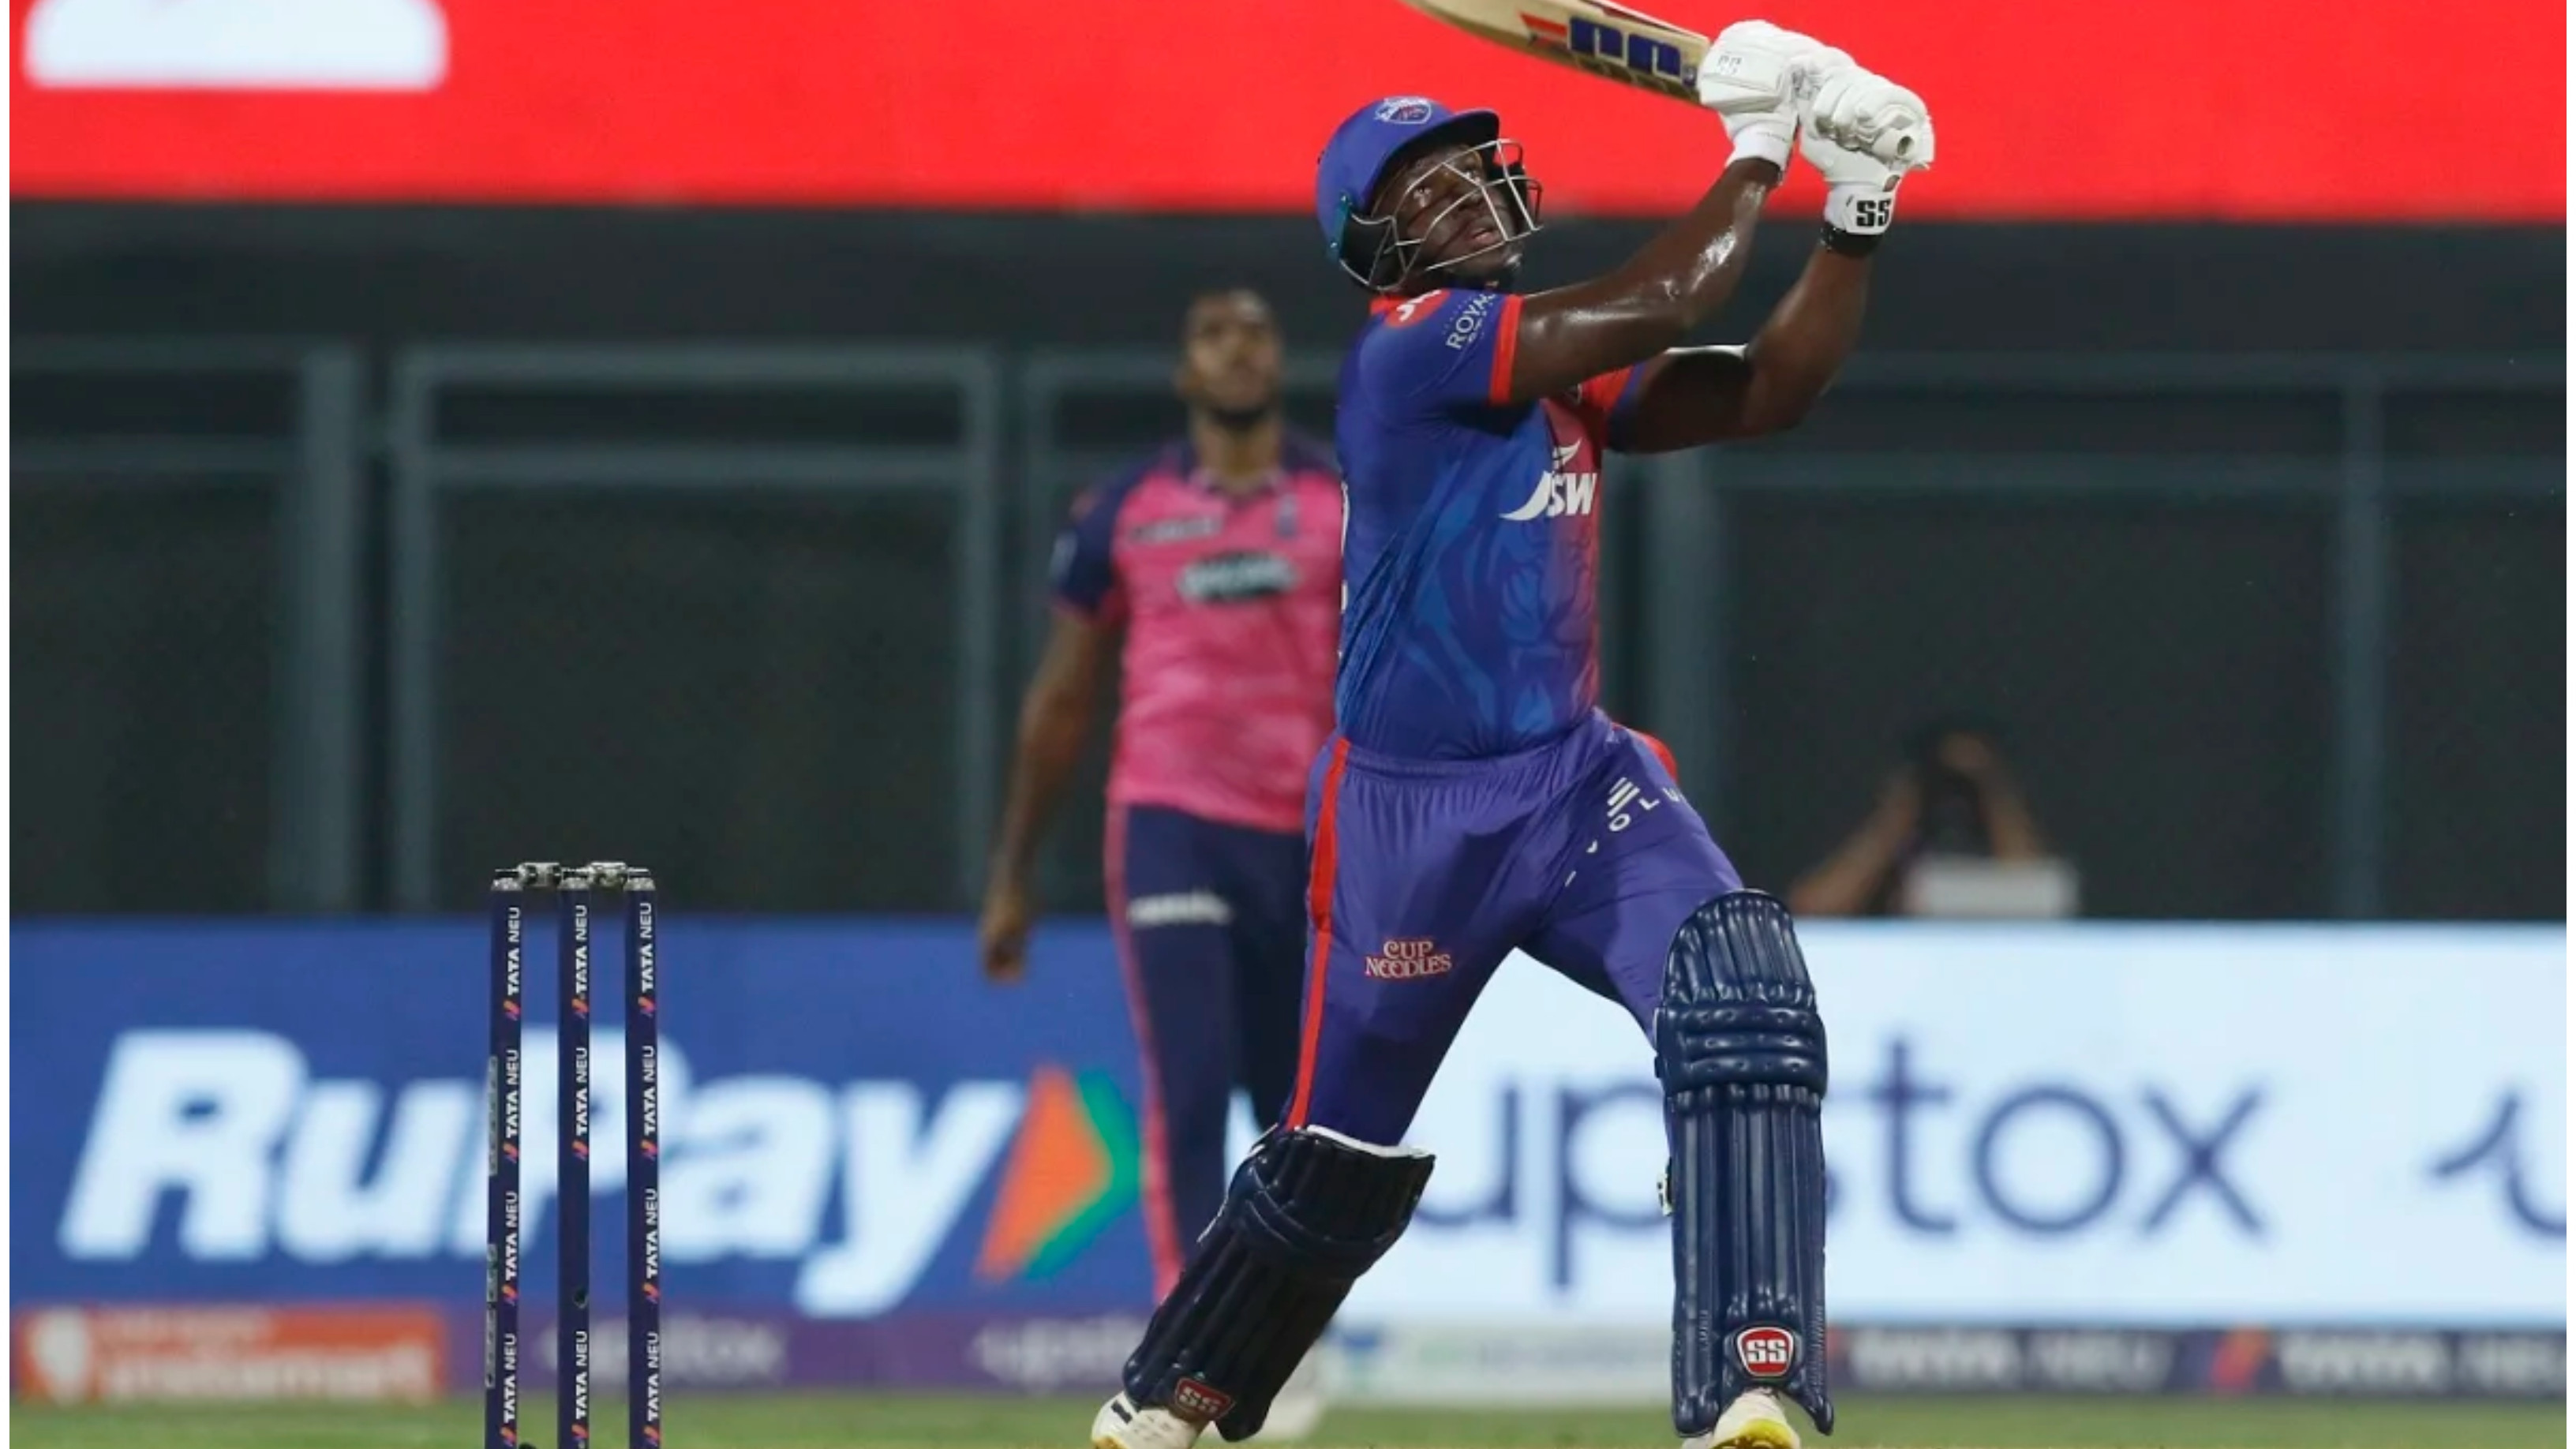 IPL 2022: Rovman Powell says he was confident of hitting 6 sixes against RR; admits umpire’s decision is final